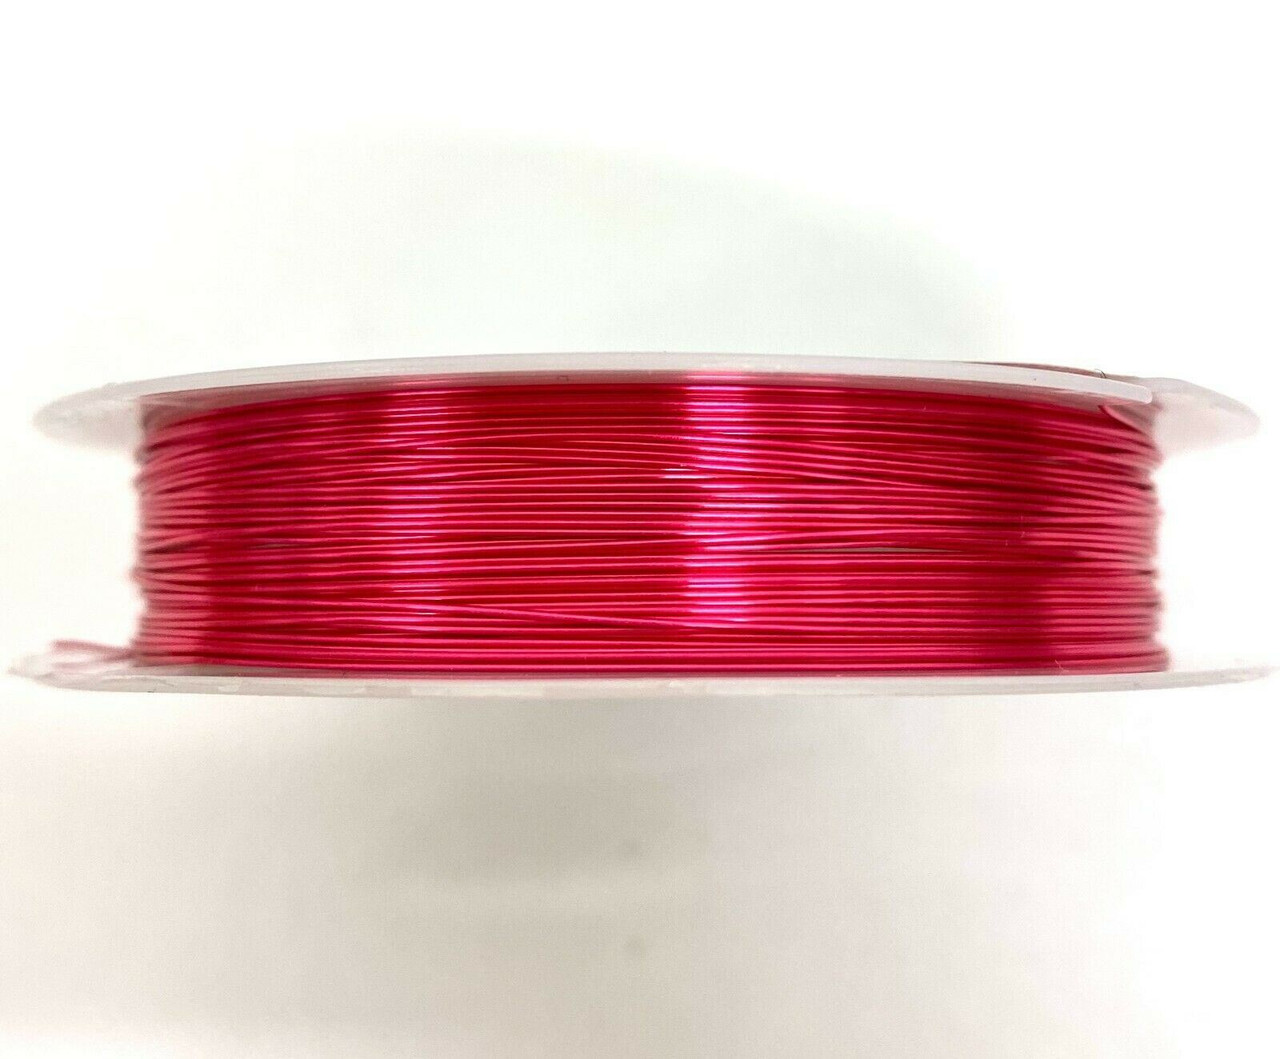 Roll of Copper Wire, 1.0mm thickness, HOT PINK colour, approx 2.5m length